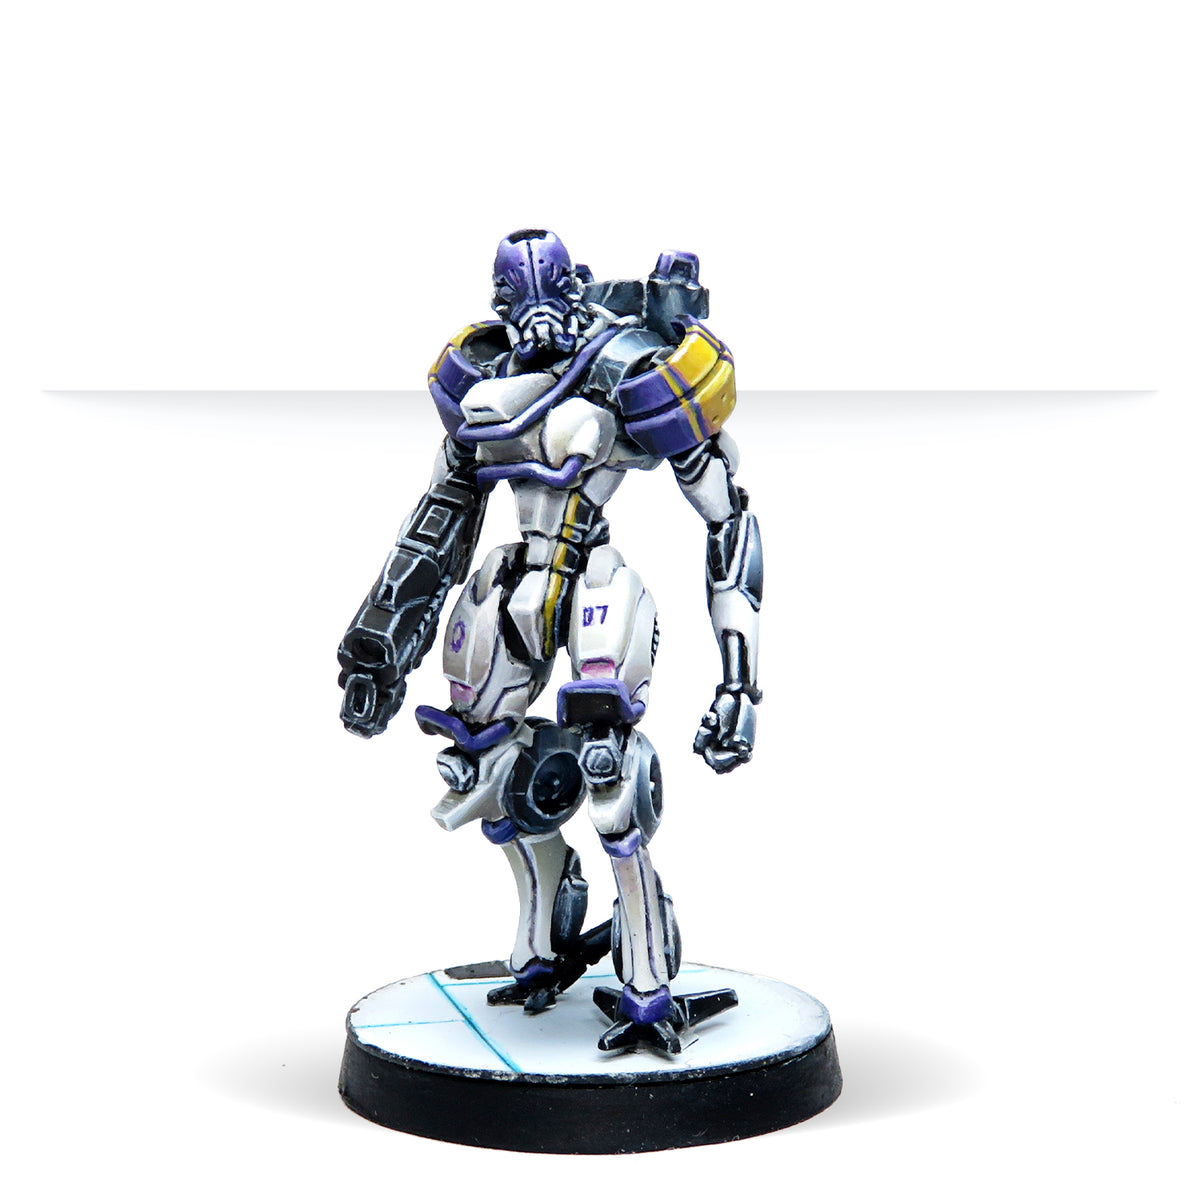 ALEPH Pack Beta [Reinforcements] [FEBRUARY PRE-ORDER]